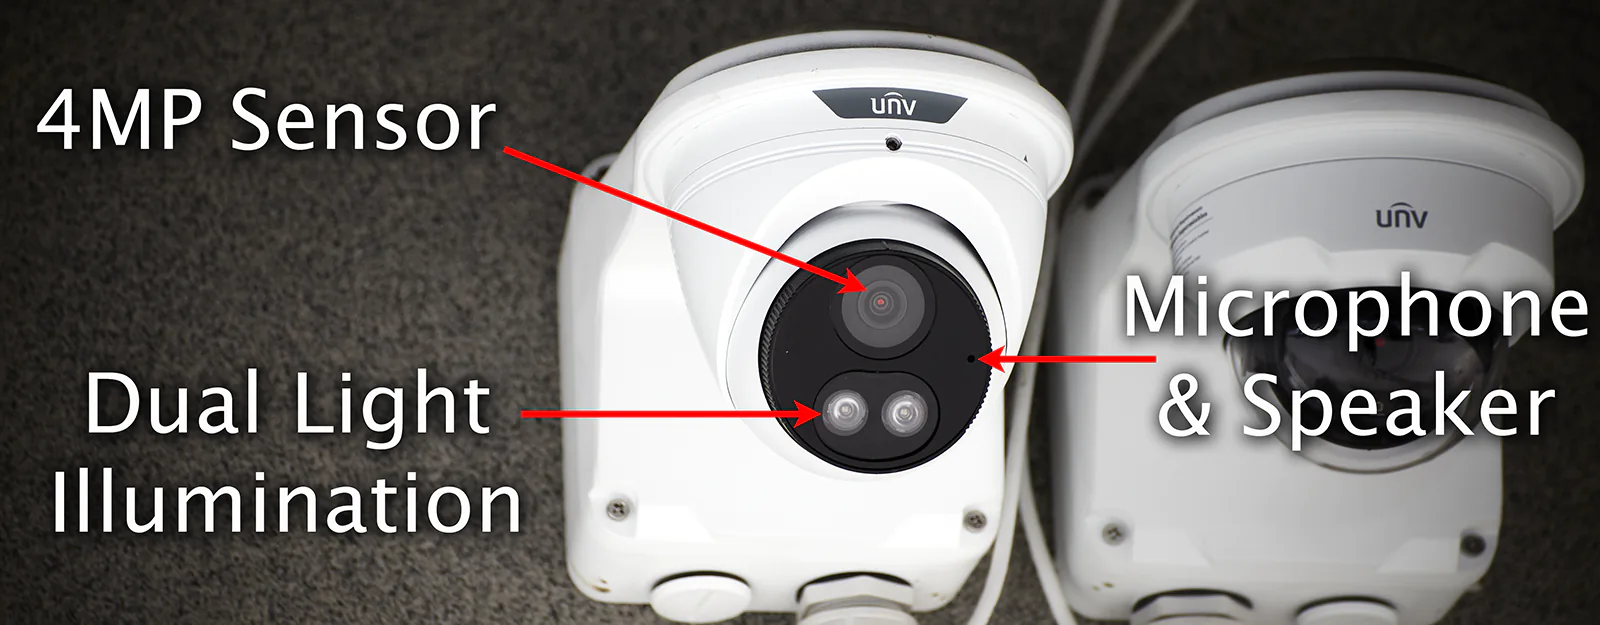 You are currently viewing Uniview 4MP Dual Light Turret Camera Review